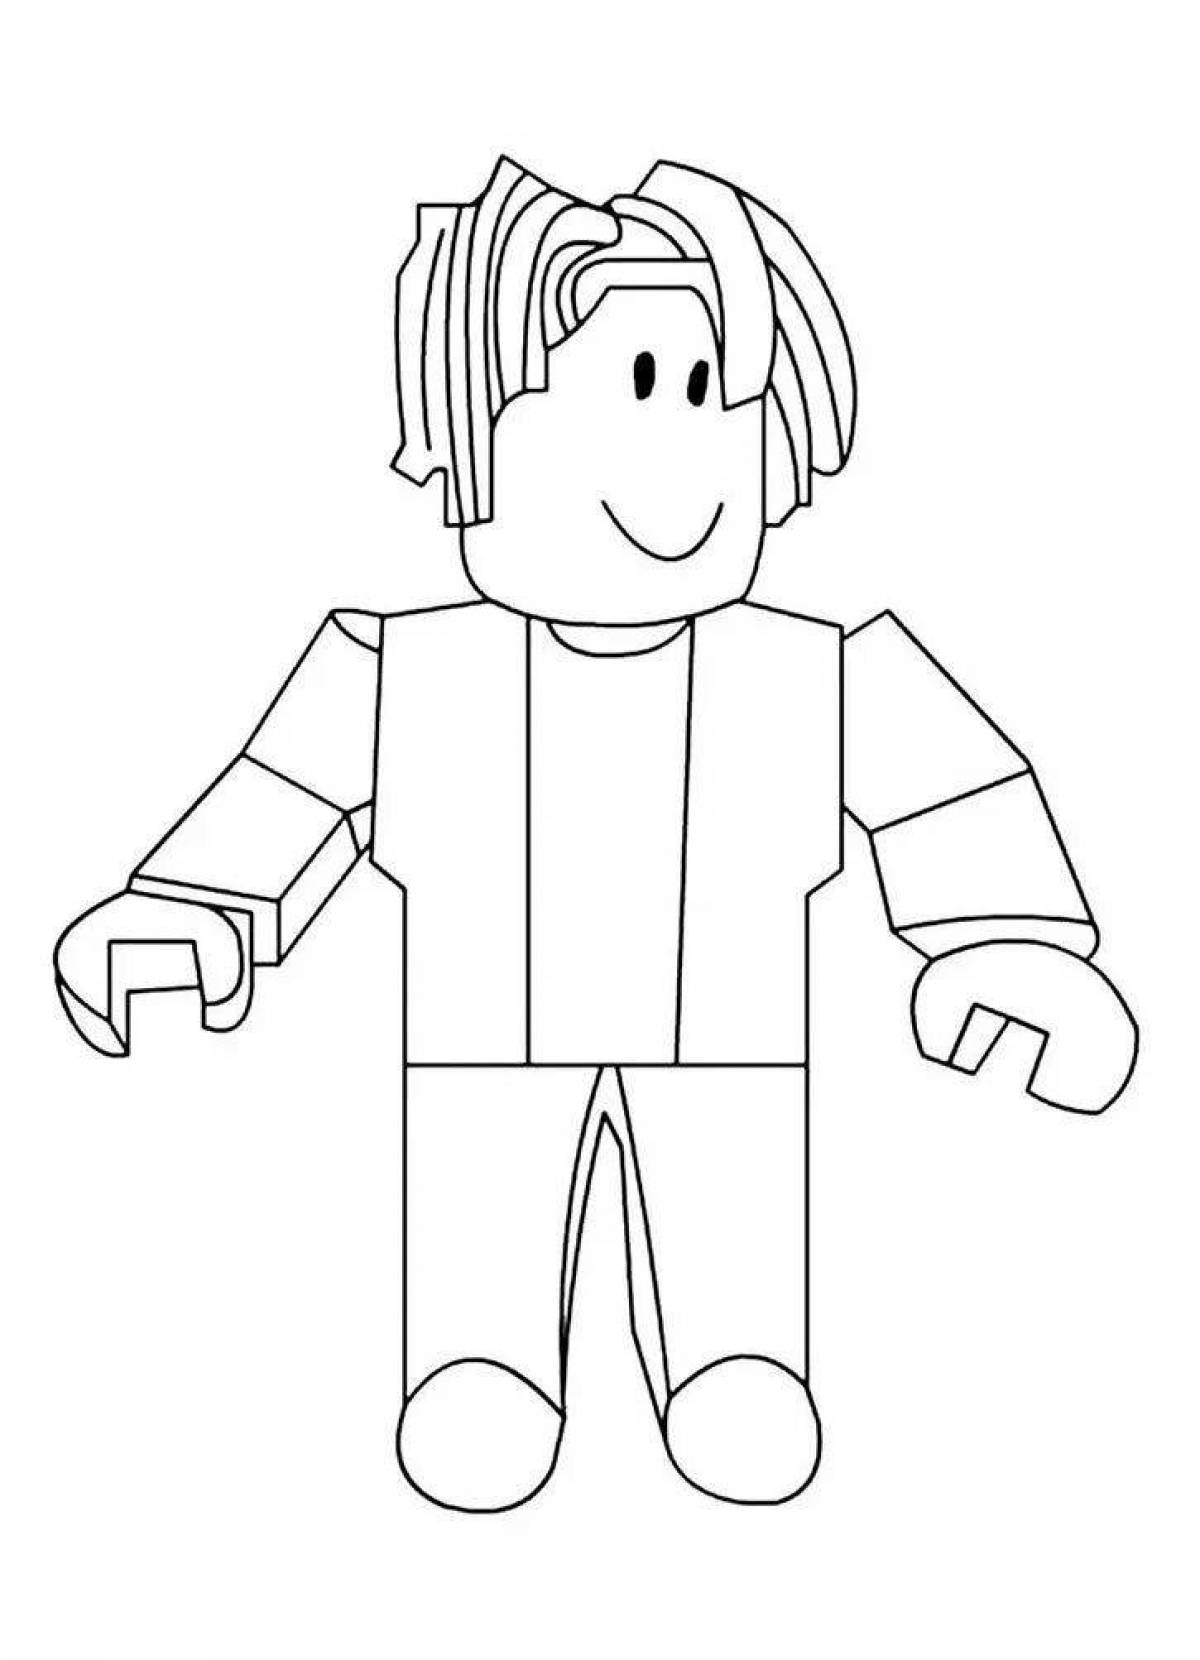 Roblox colorful coloring book